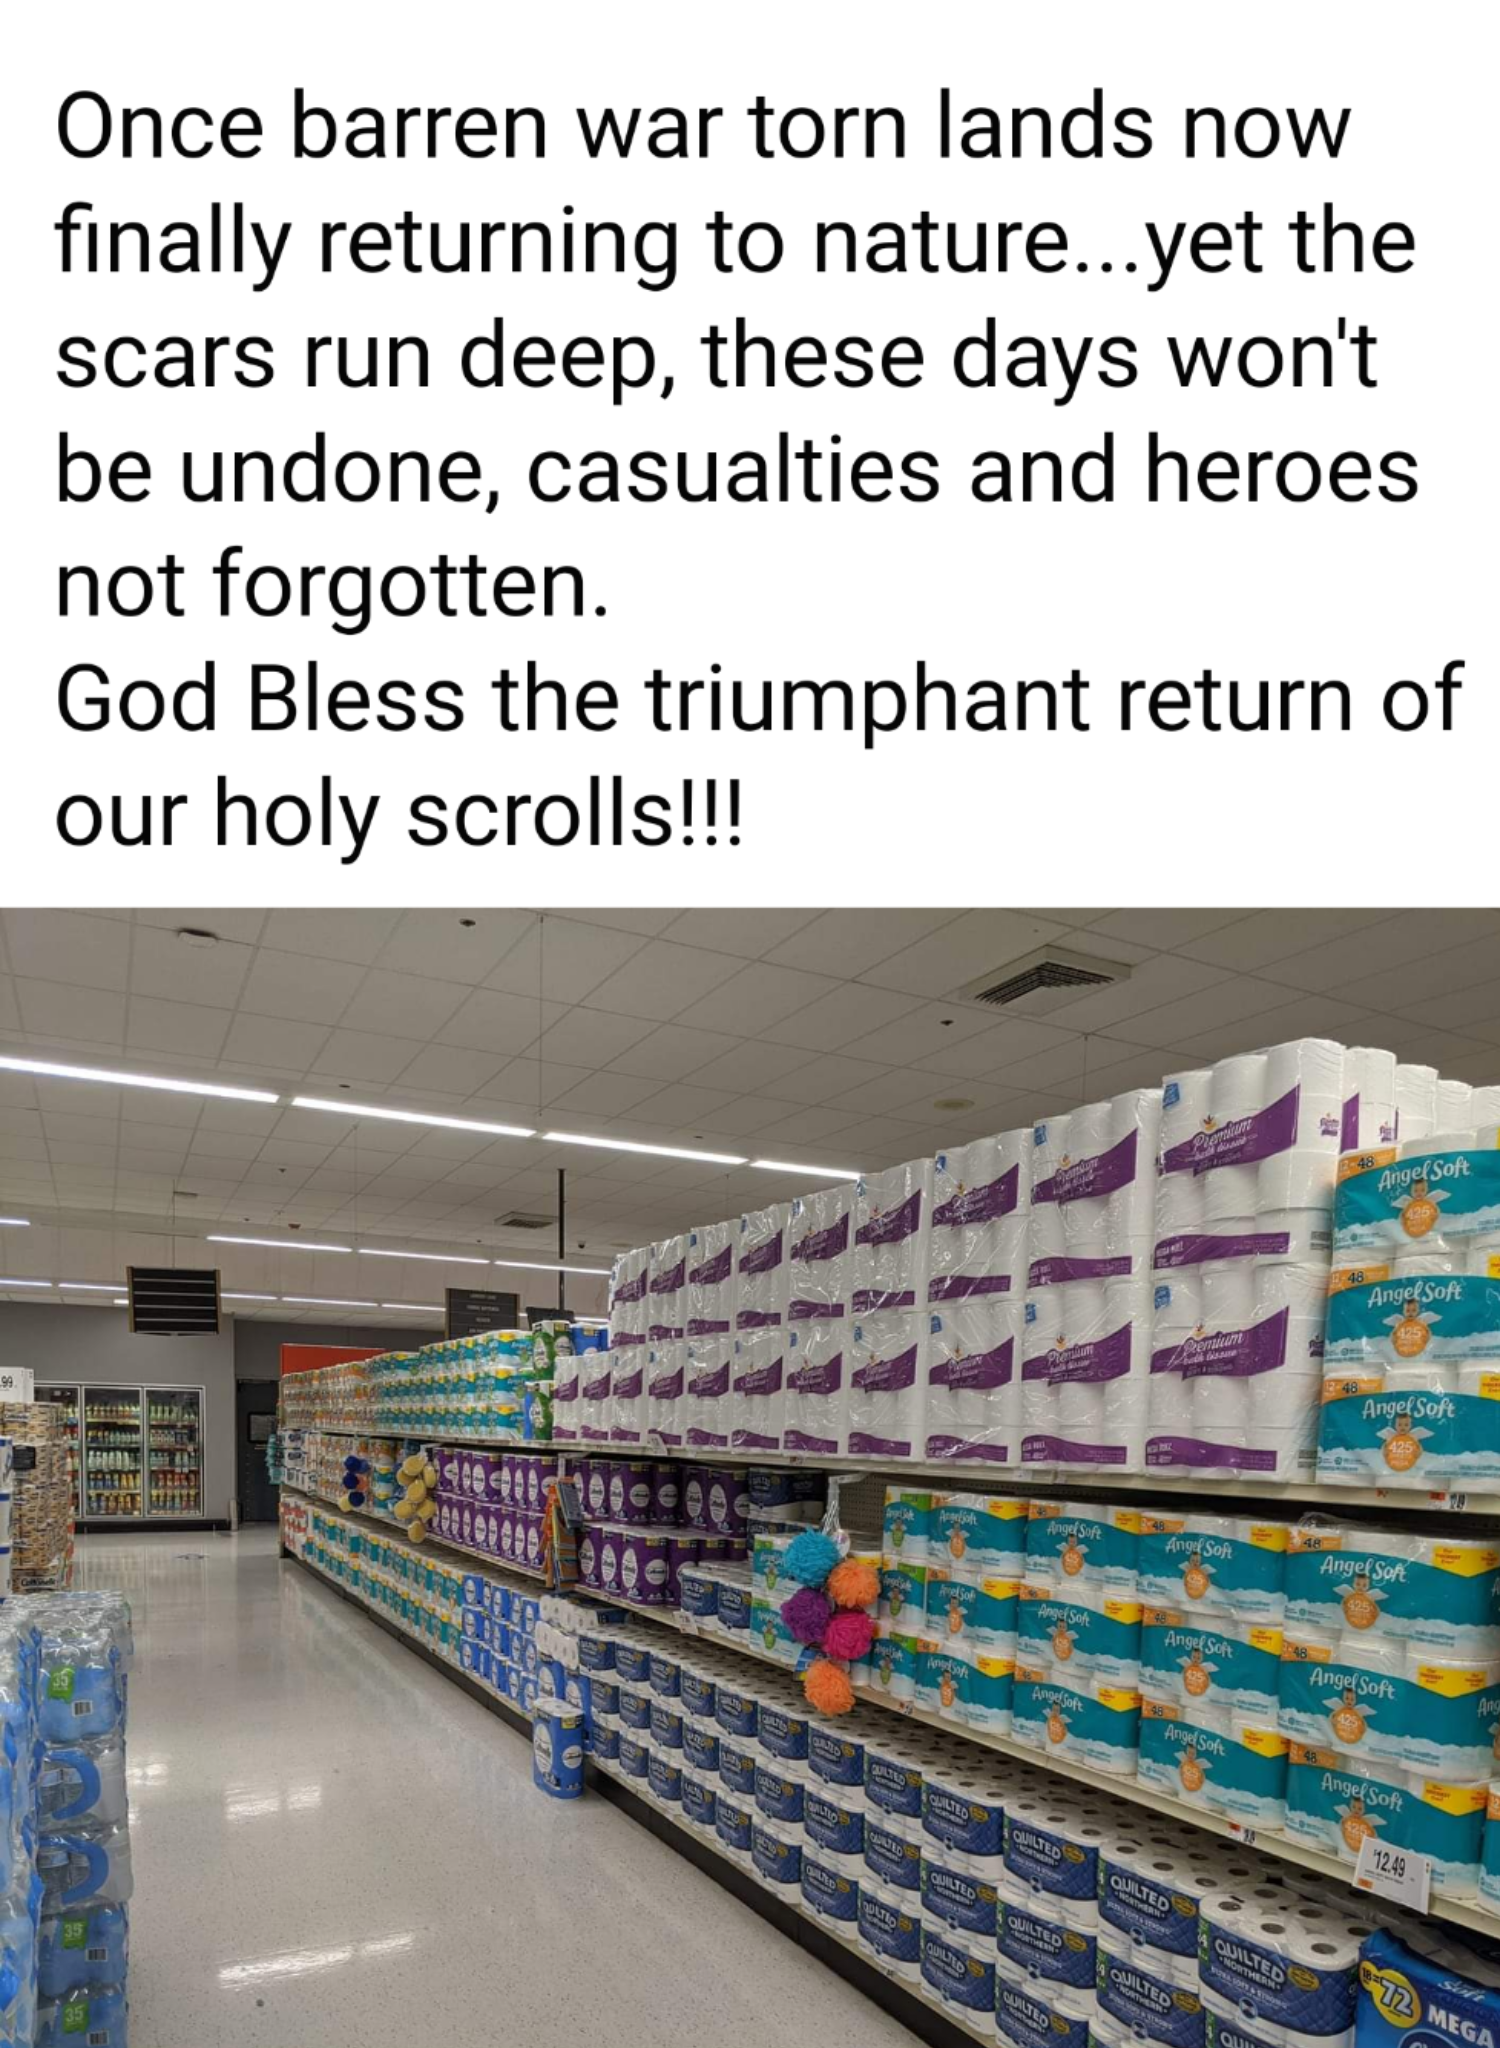 inventory - Once barren war torn lands now finally returning to nature...yet the scars run deep, these days won't be undone, casualties and heroes not forgotten. God Bless the triumphant return of our holy scrolls!!! fer